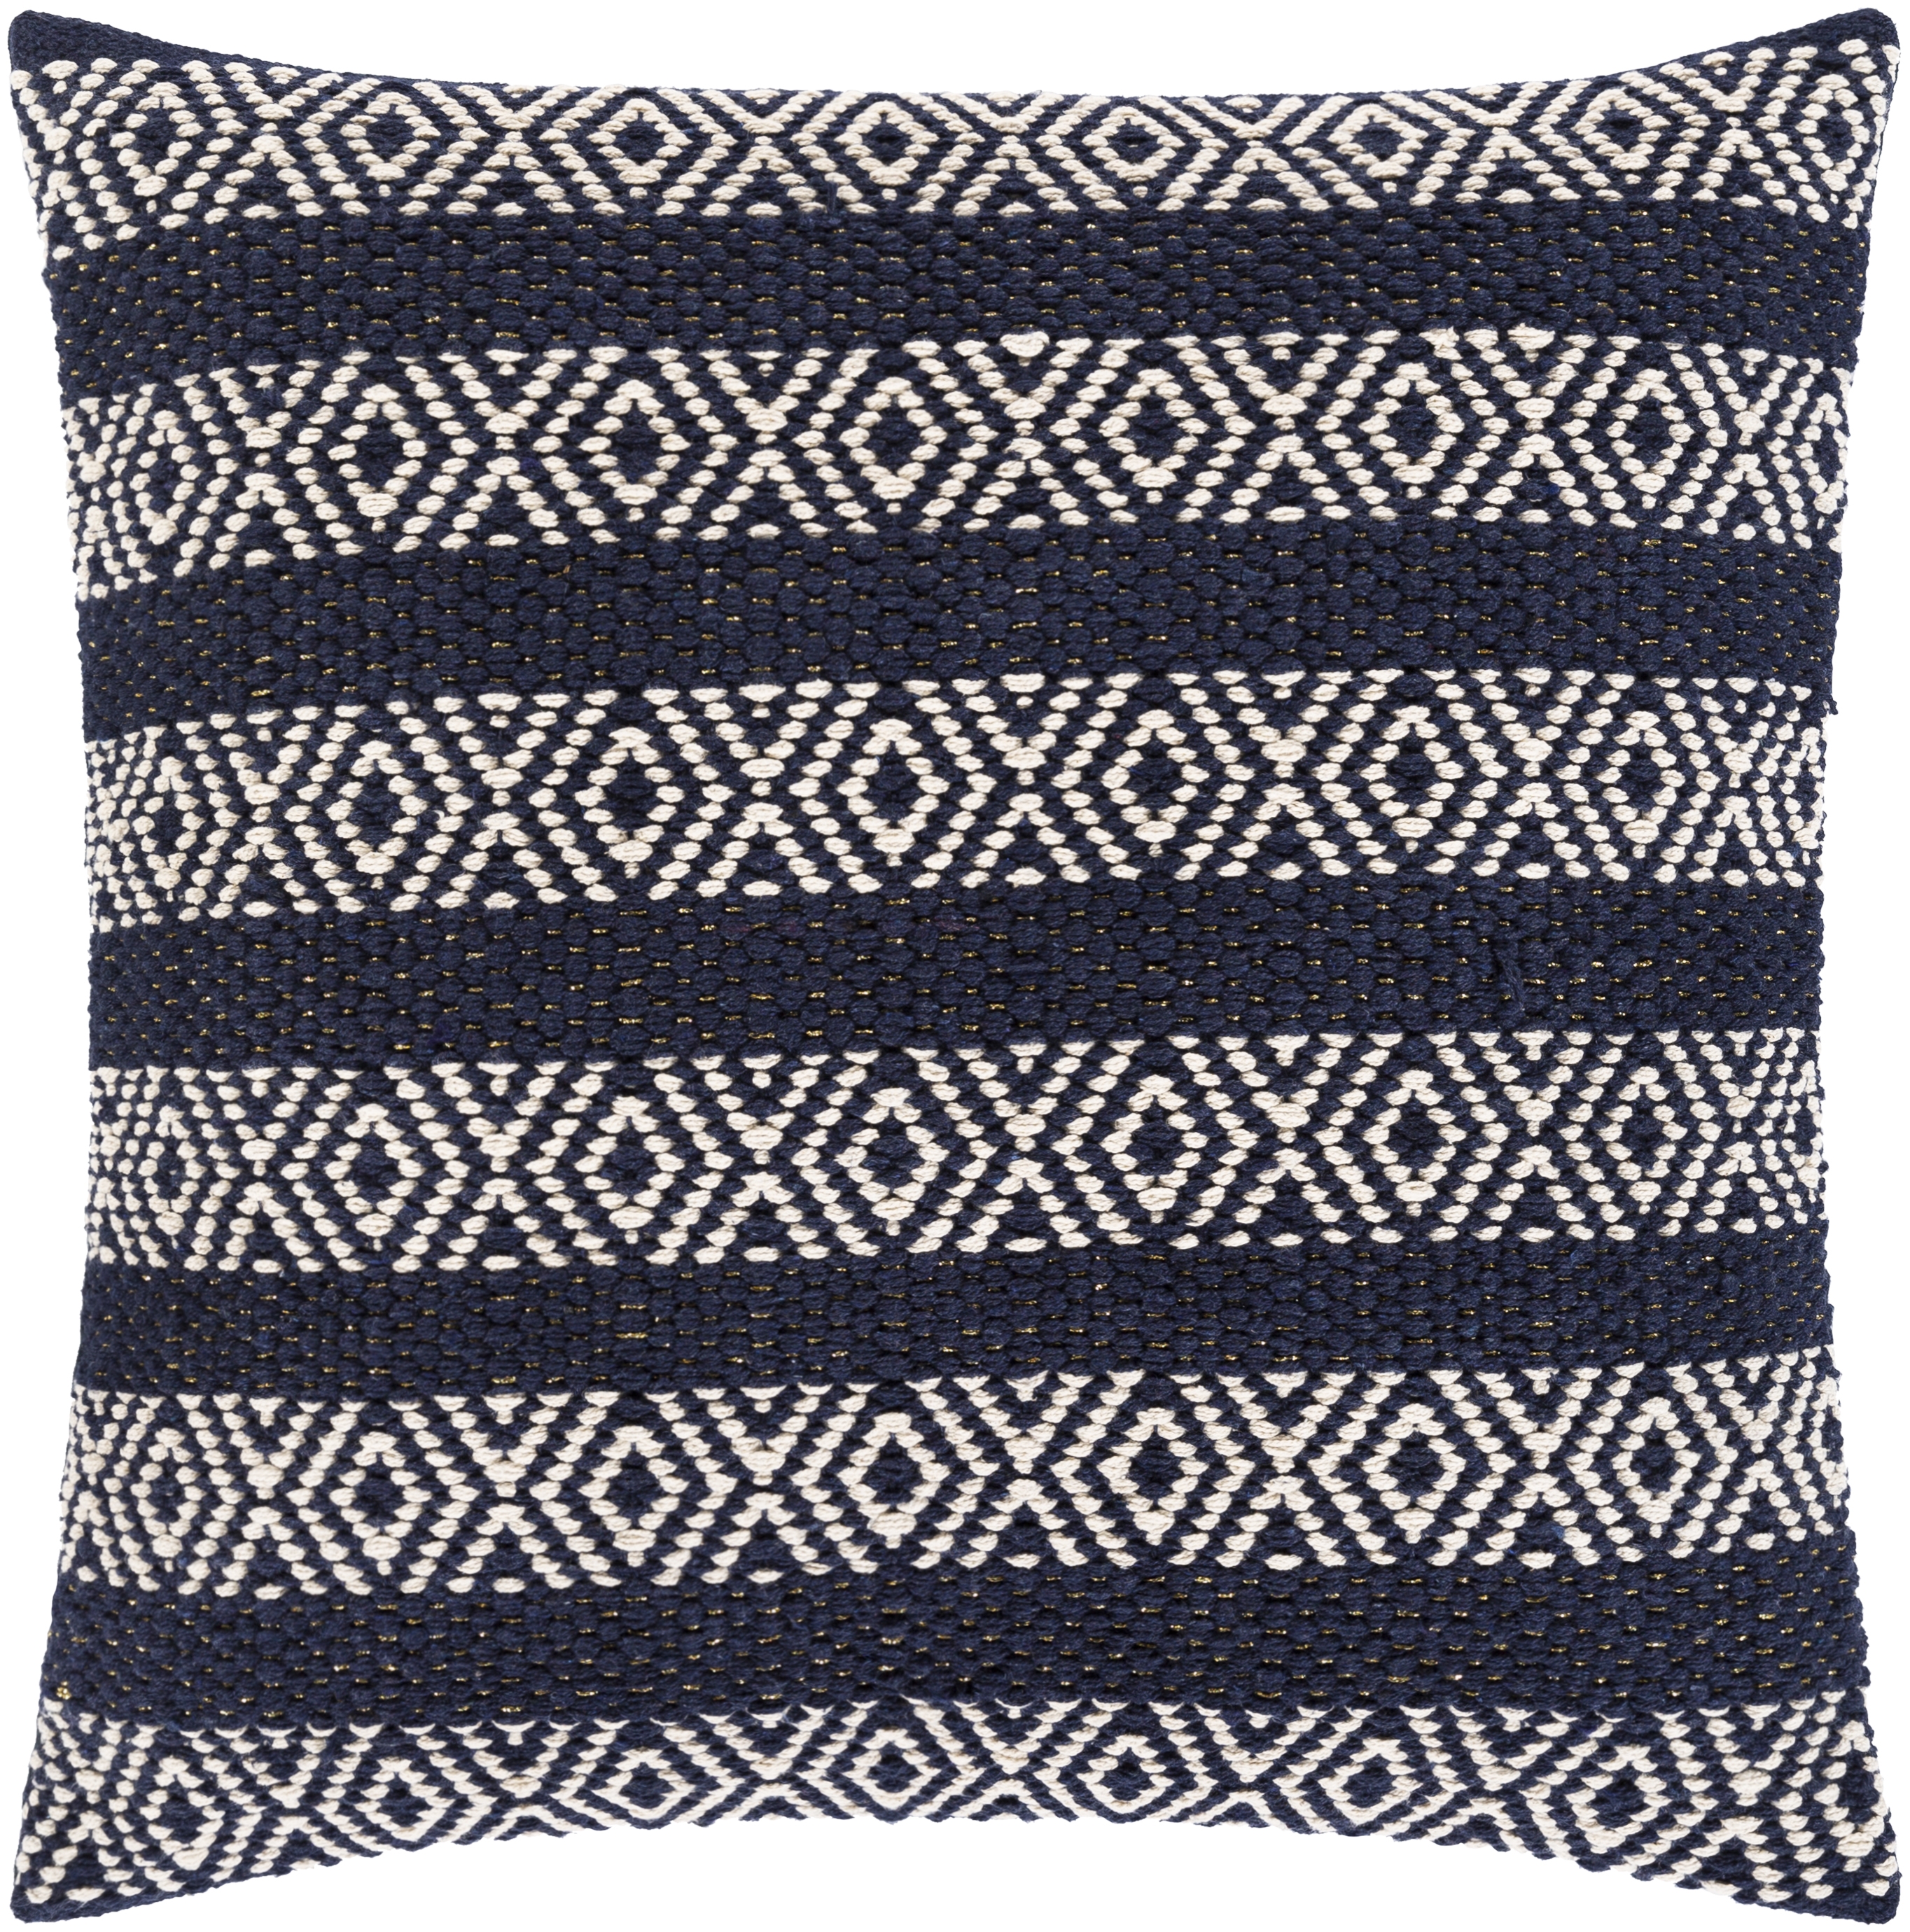 Ibiza - IBZ-003 - 18" x 18" - pillow cover only - Image 0